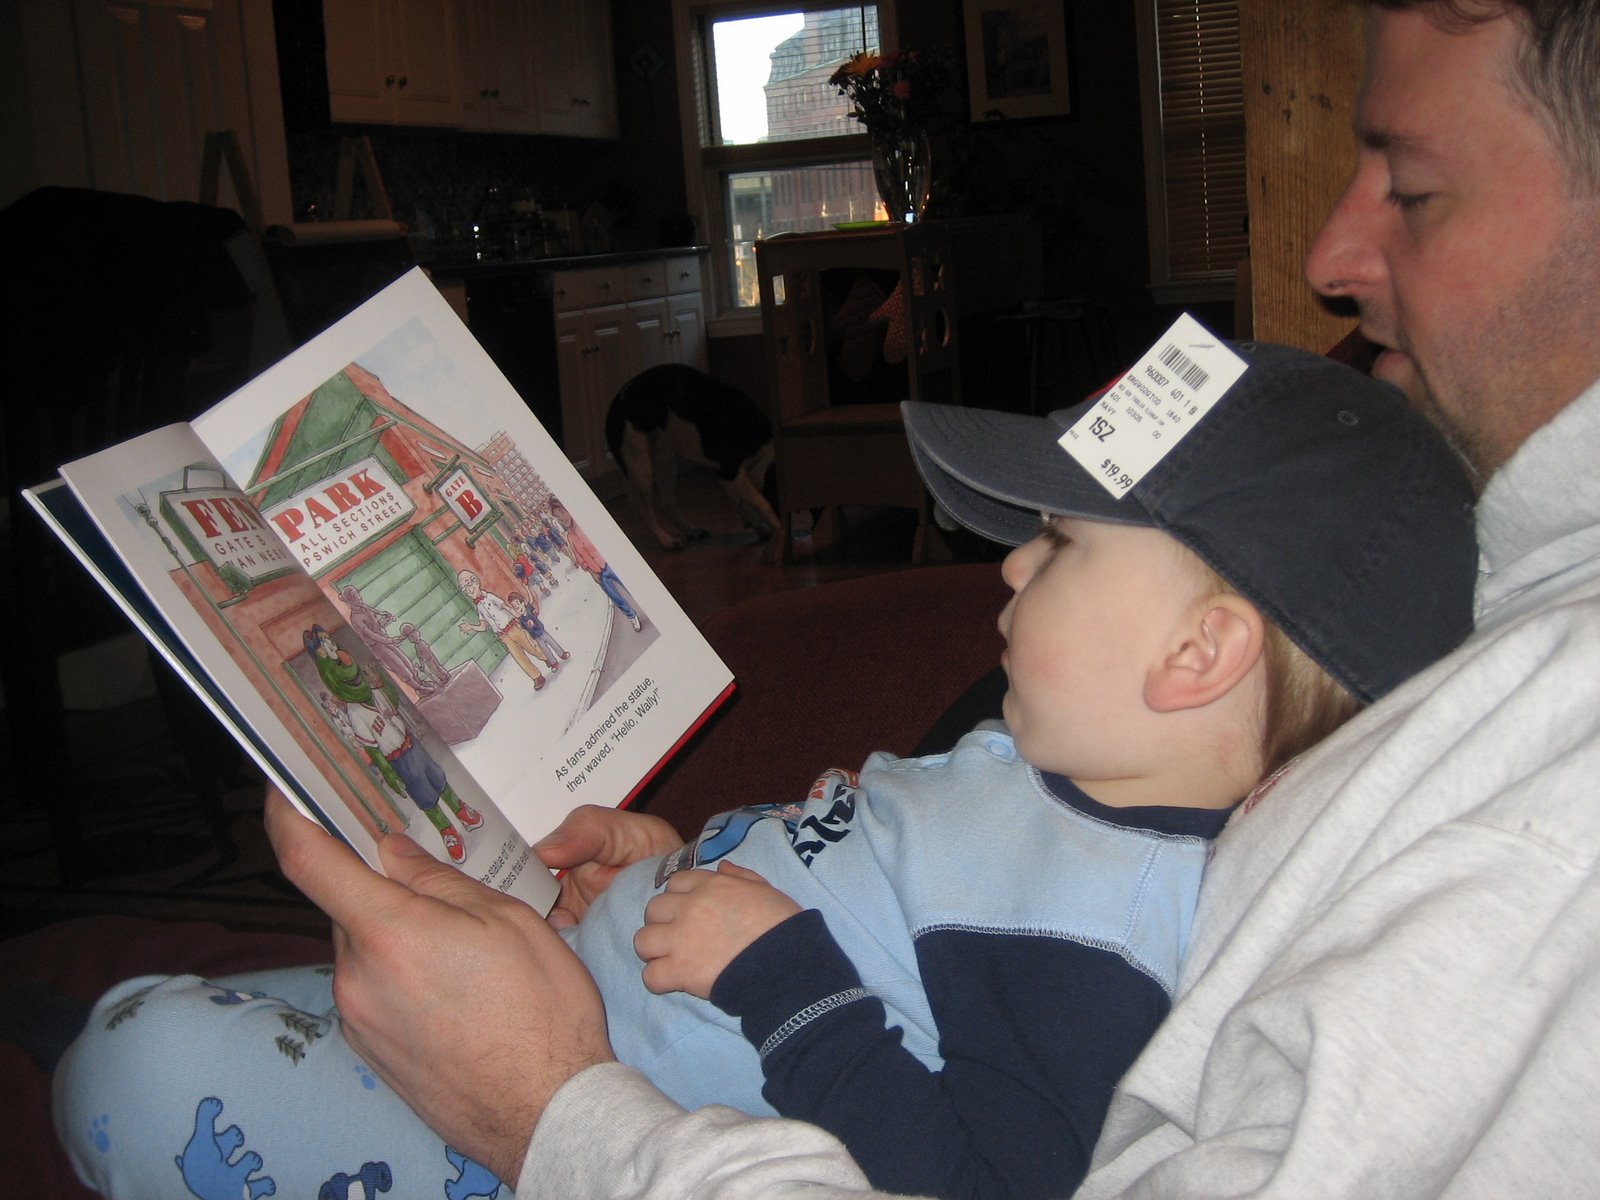 [Red+Sox+hat+and+Wally+book.jpg]